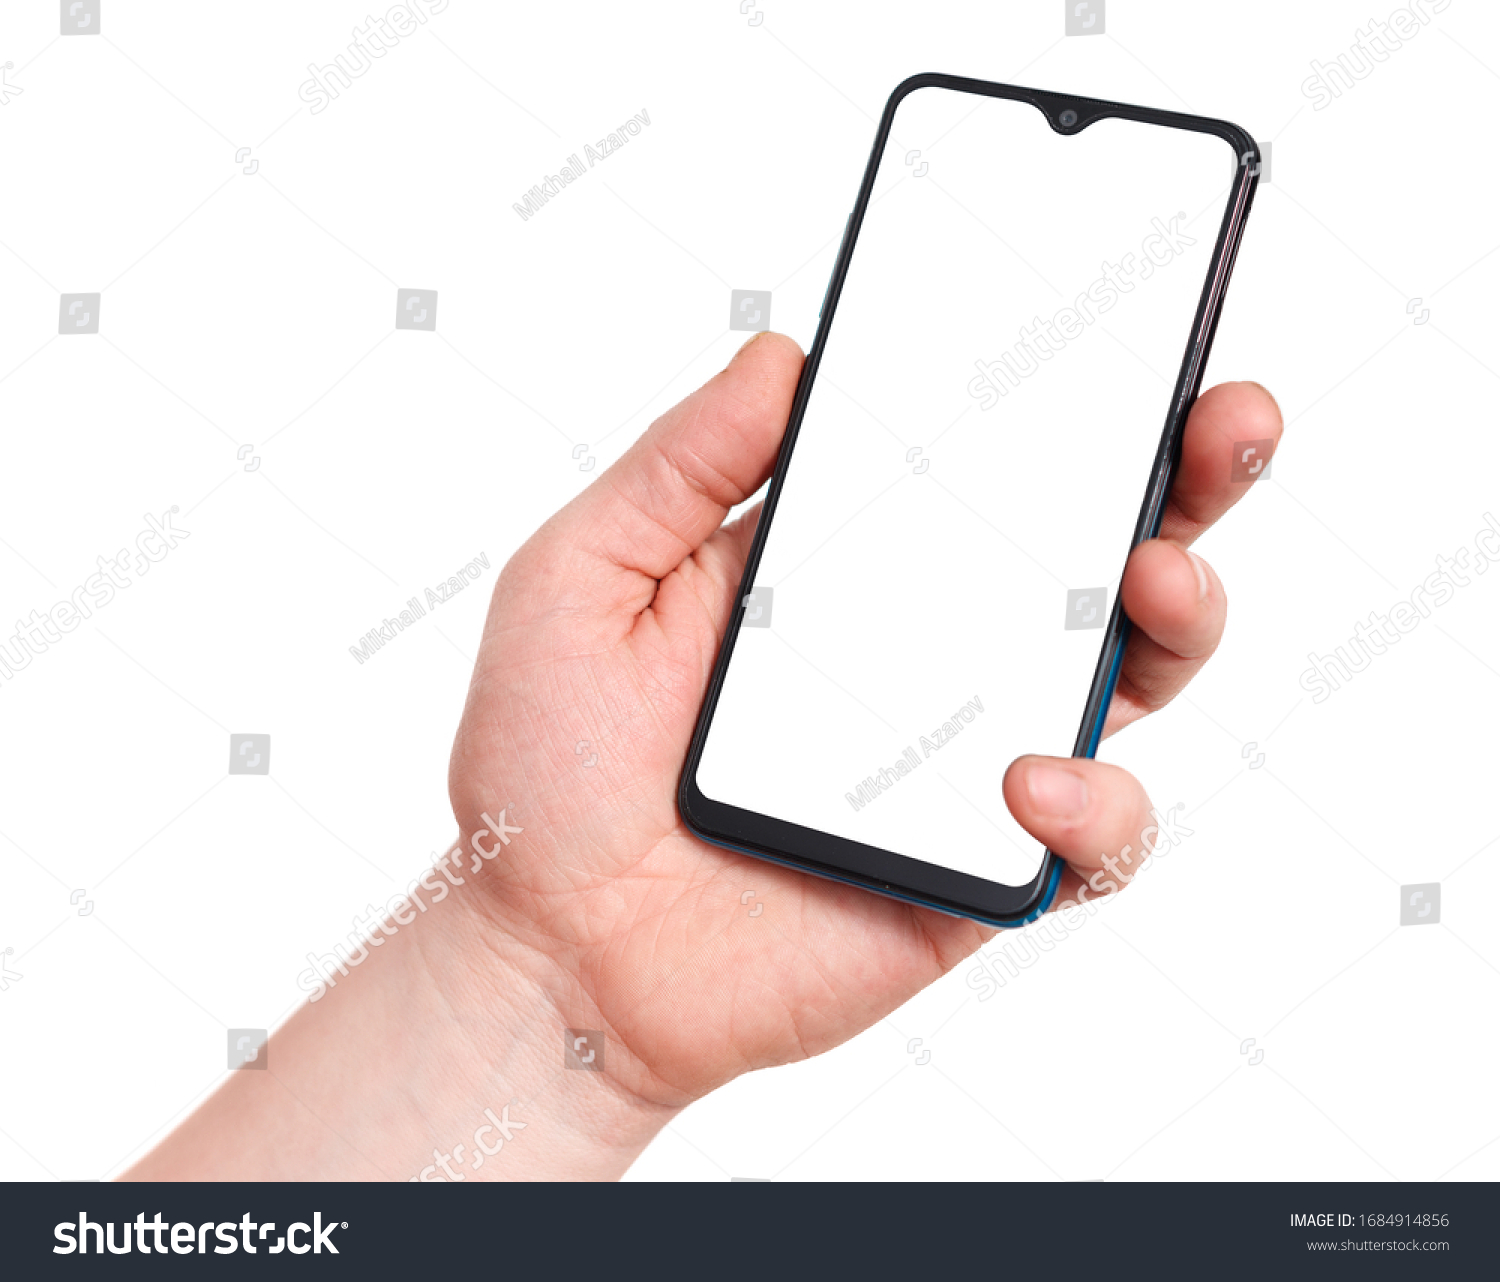 Hand holding mobile smart phone with blank screen. Isolated on white background. #1684914856